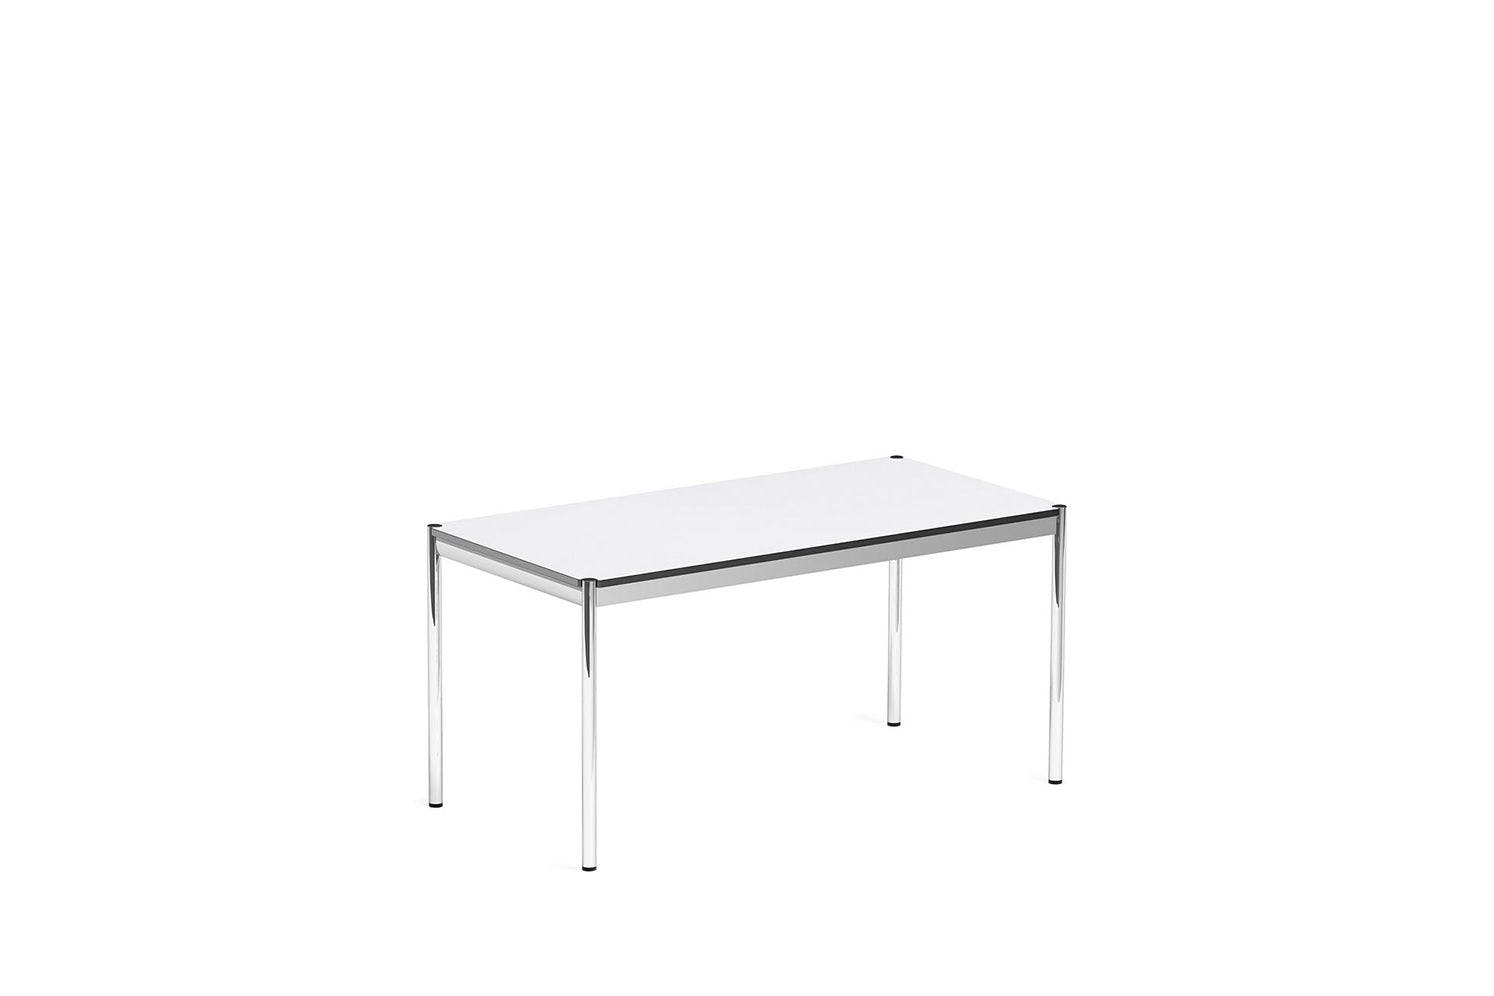 Usm Haller Table Featured Image